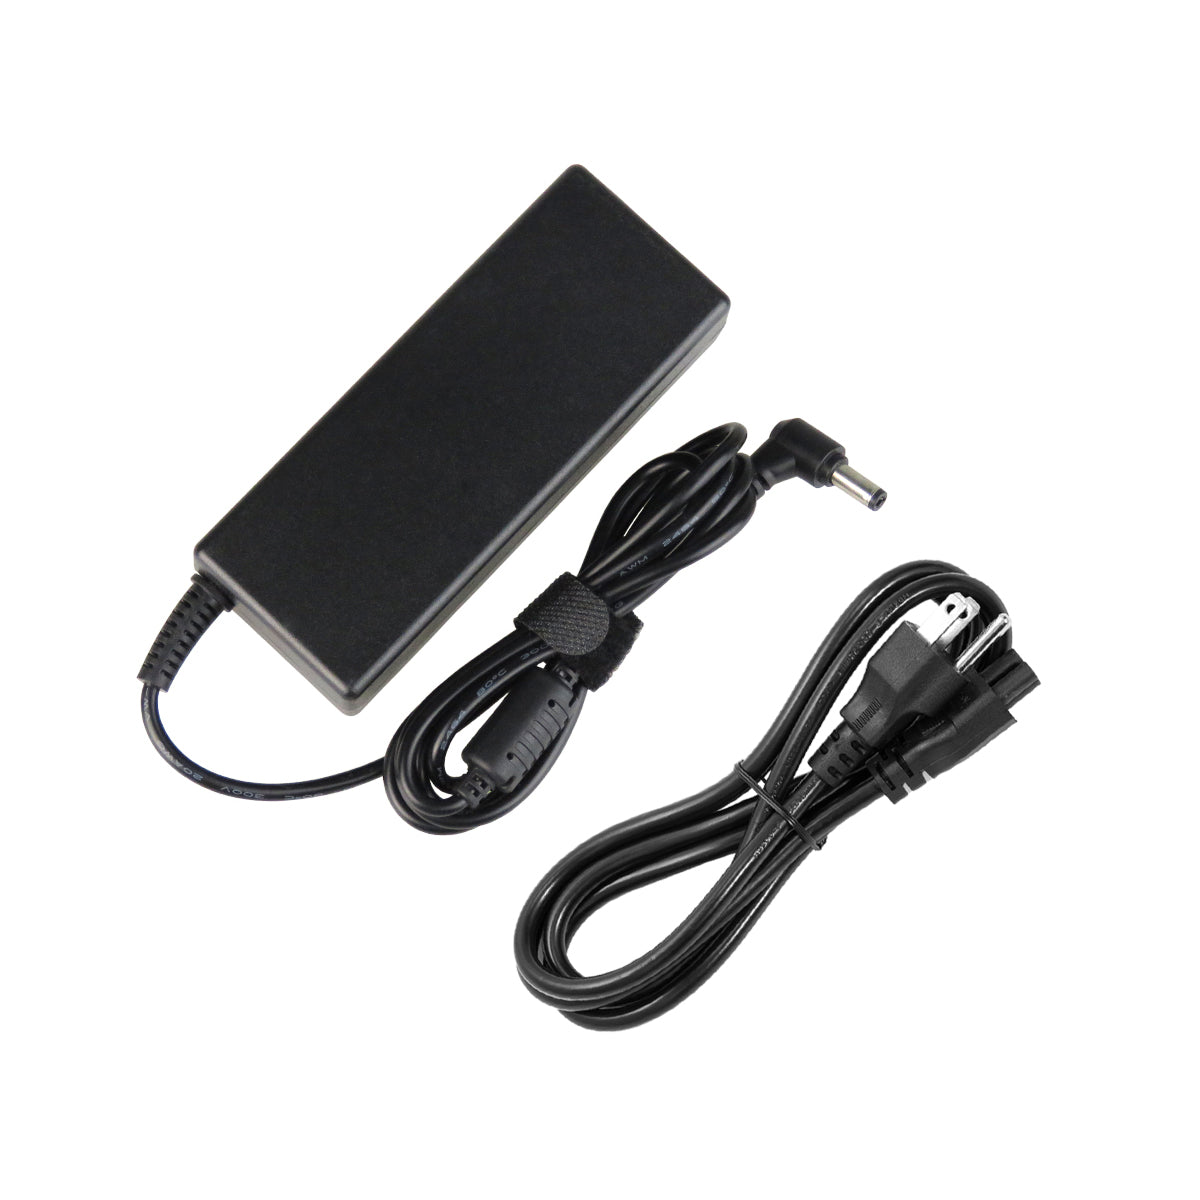 AC Adapter Charger for ASUS P43SJ Notebook.